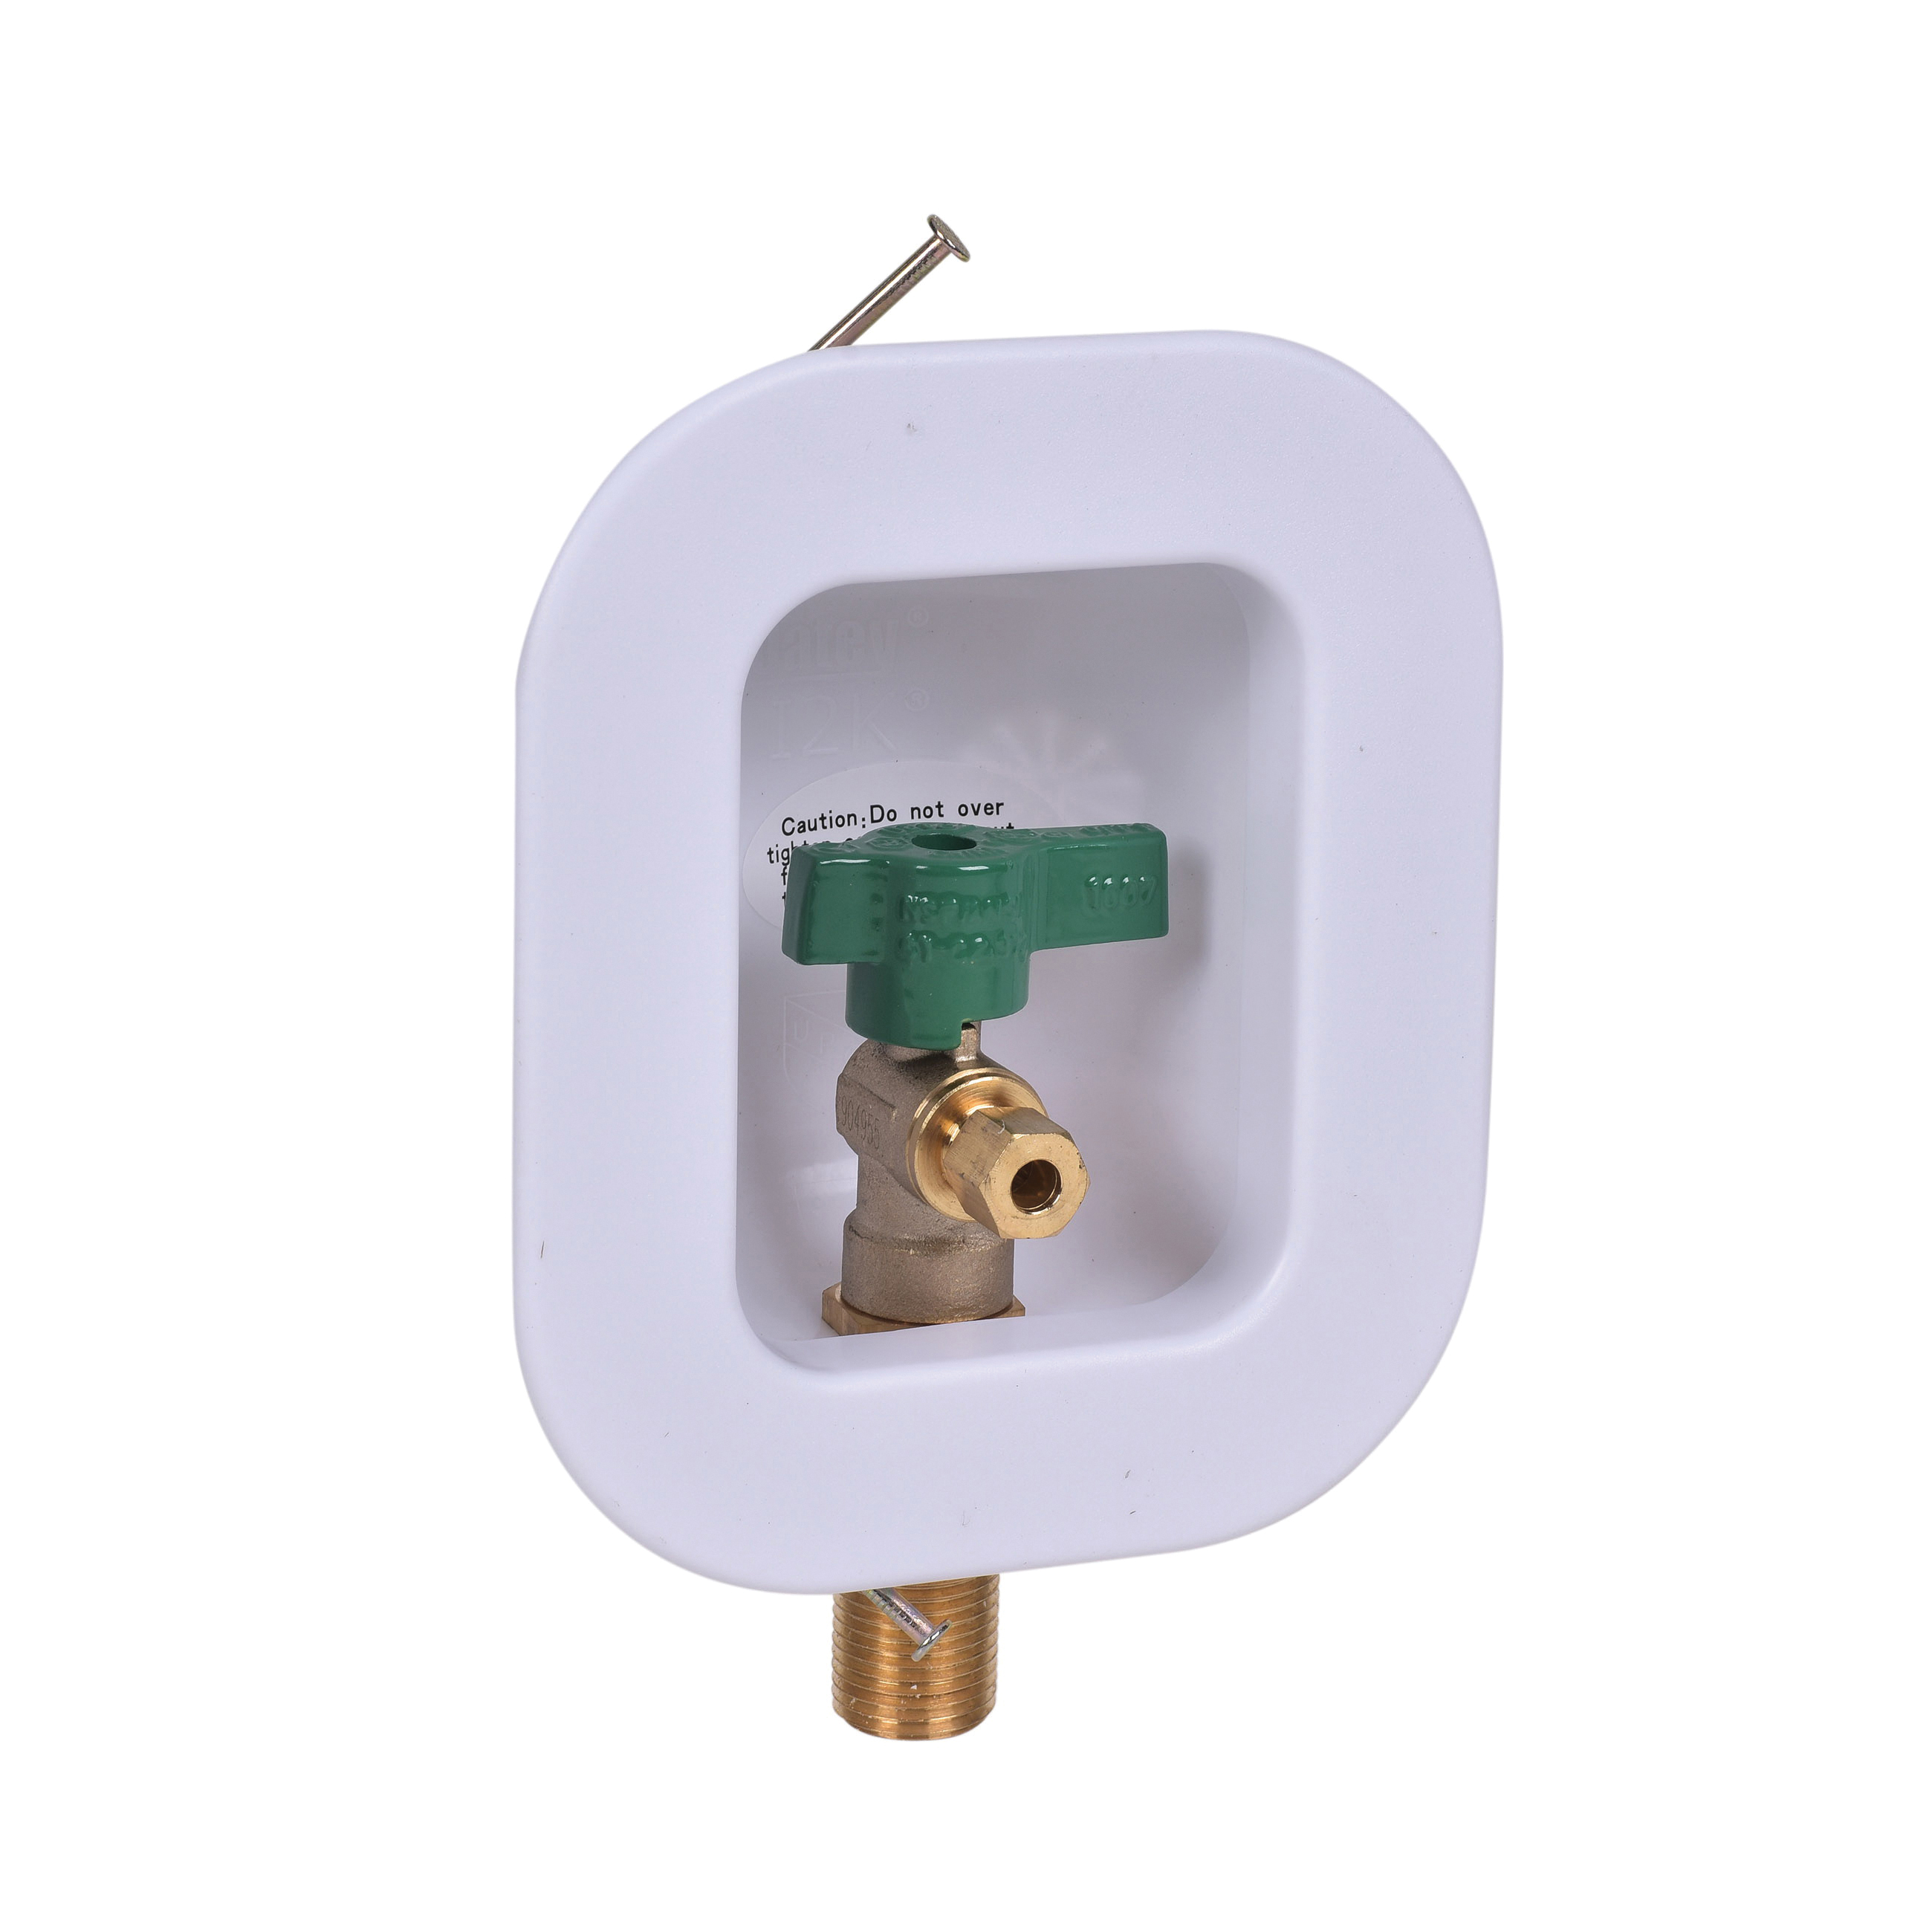 Fluidmaster 12IM72 72 in. Ice Maker Connector